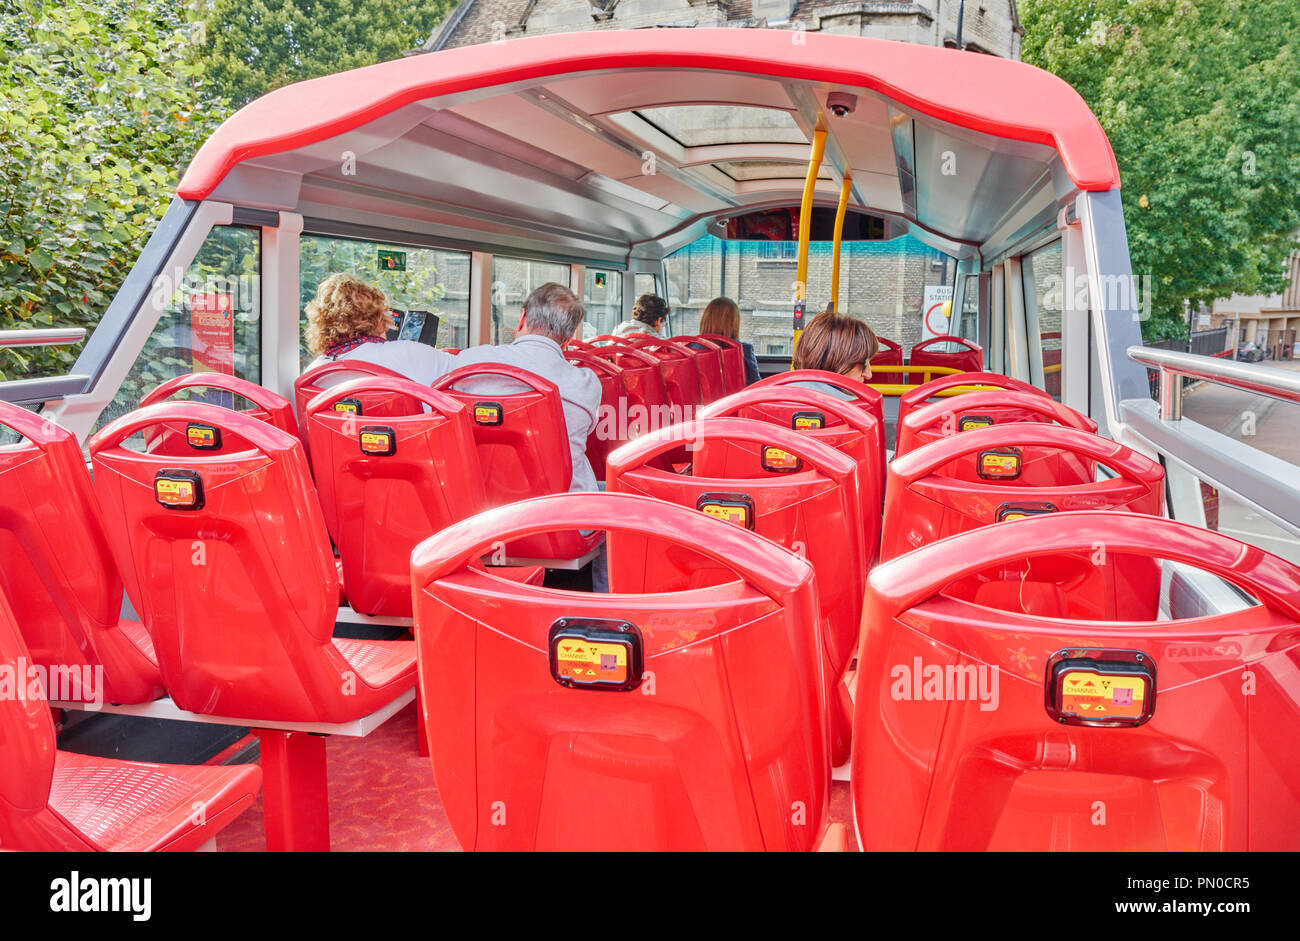 The upper deck of a hop-on, hop-off, sightseeing red double decker bus at Cambridge, England Stock Photo